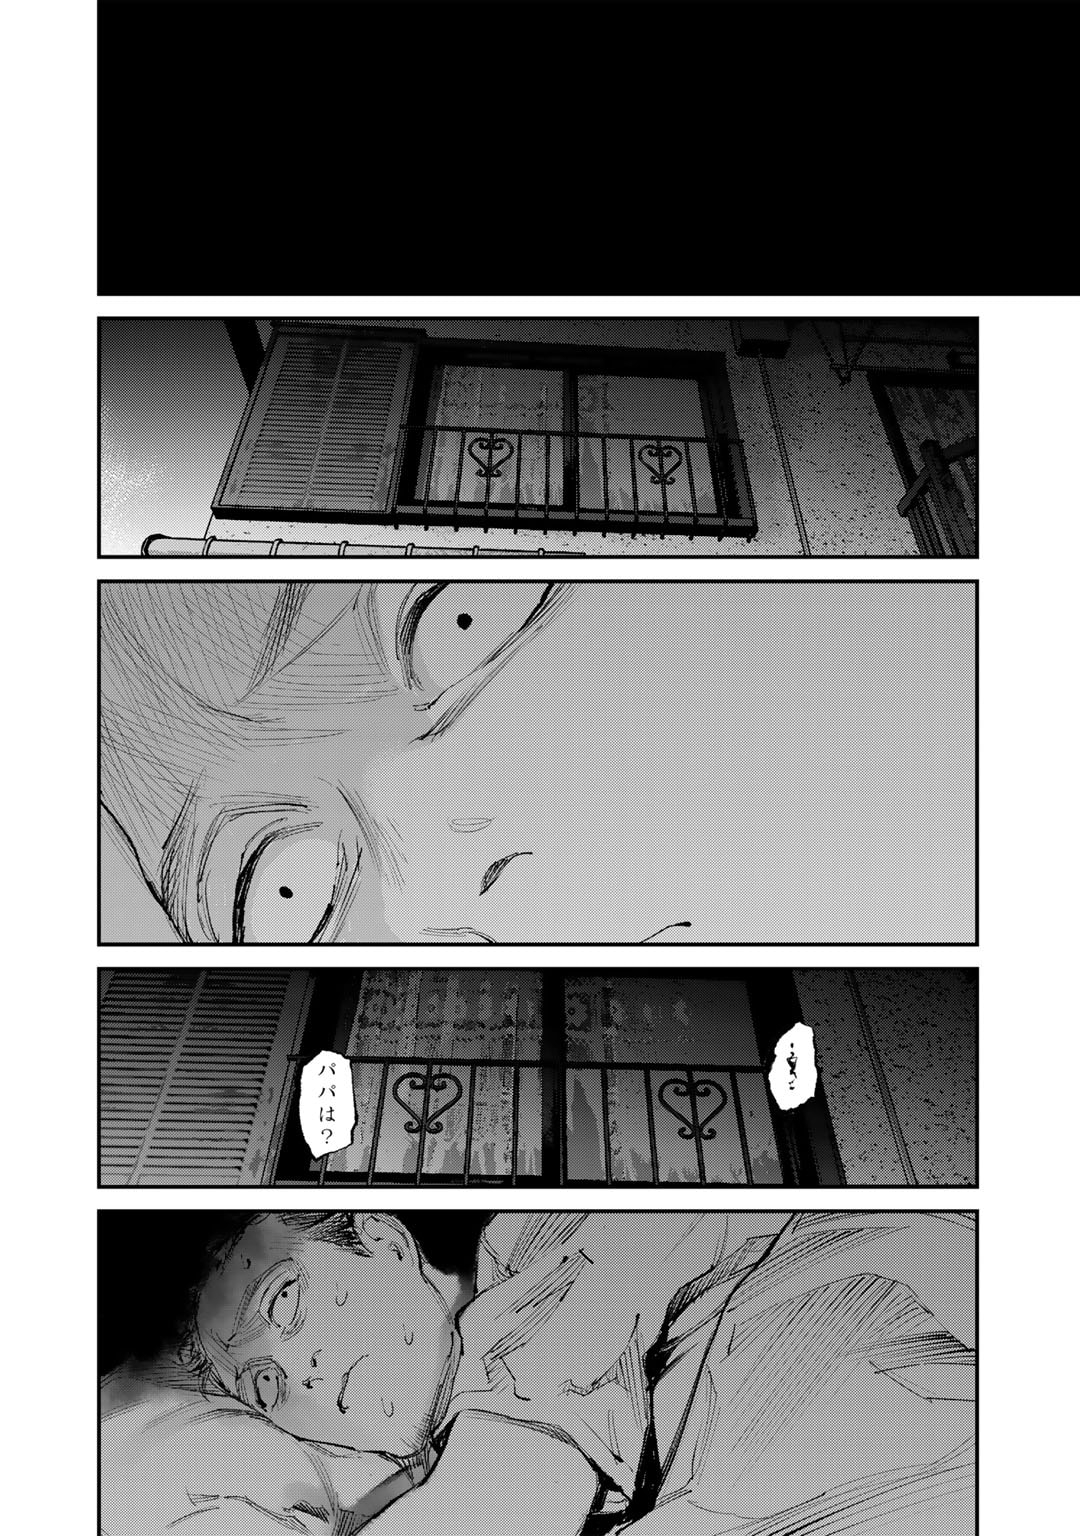 Kanata Is Into More Darker - Chapter 9 - Page 8